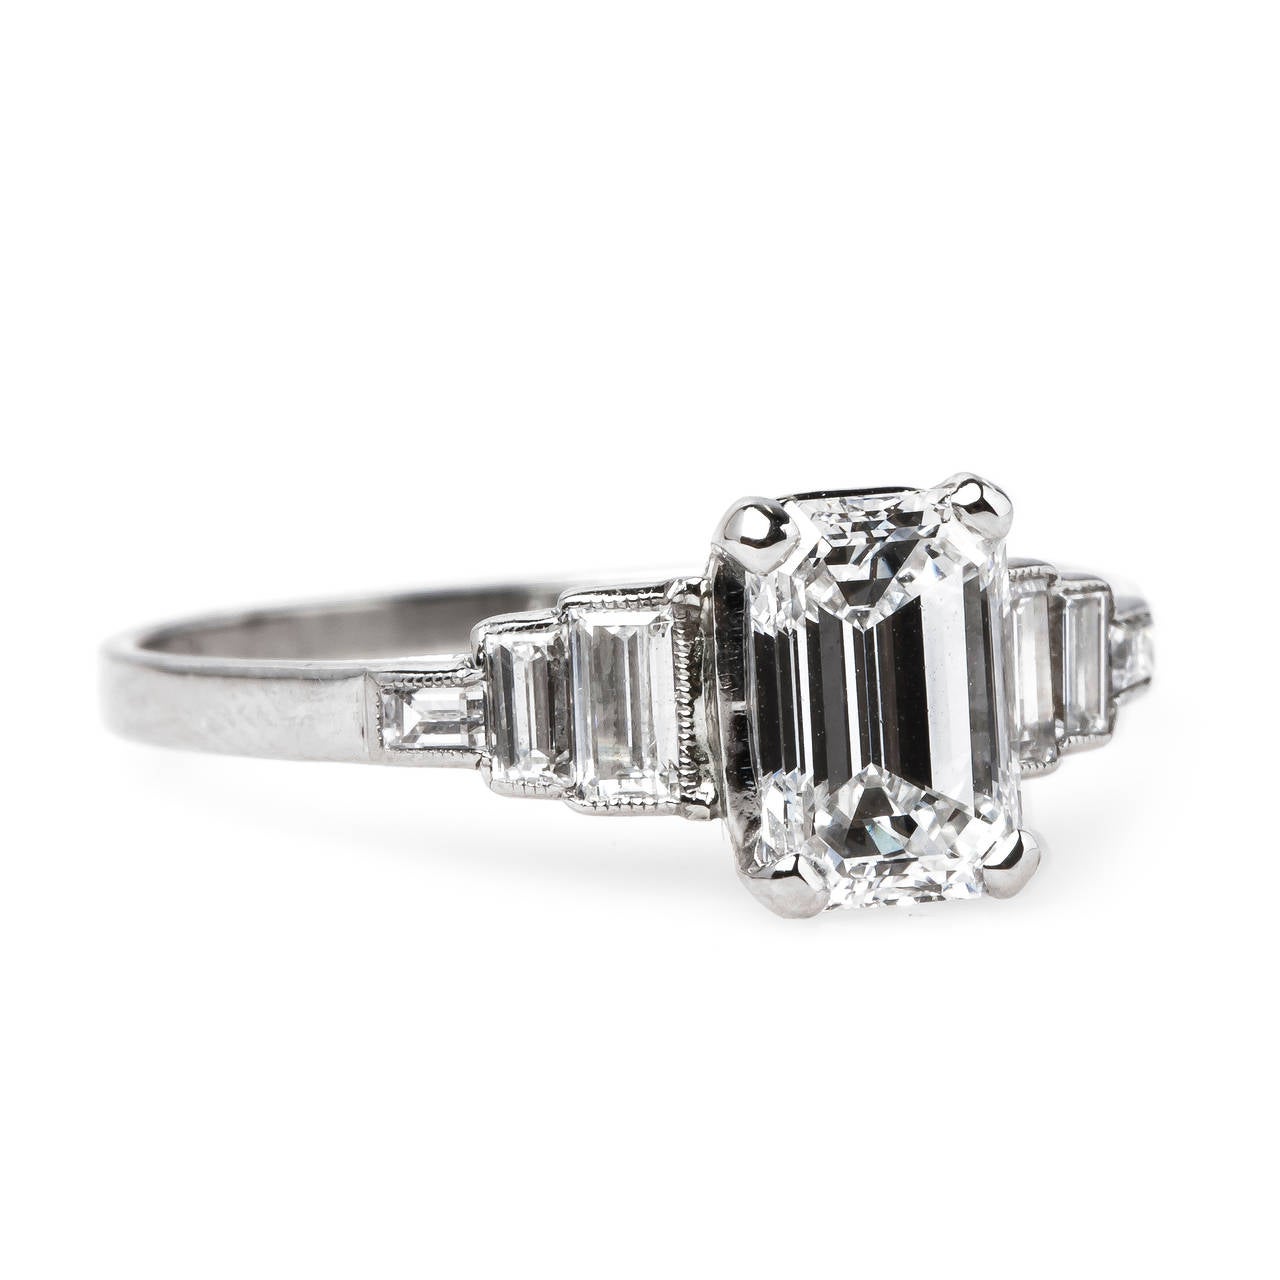 Edendale is a wonderfully classic vintage Art Deco (circa 1925) platinum ring centering a 1.04ct GIA certified Emerald Cut diamond graded F color and VS1 clarity. The center stone is further flanked by six channel set baguette cut diamonds that